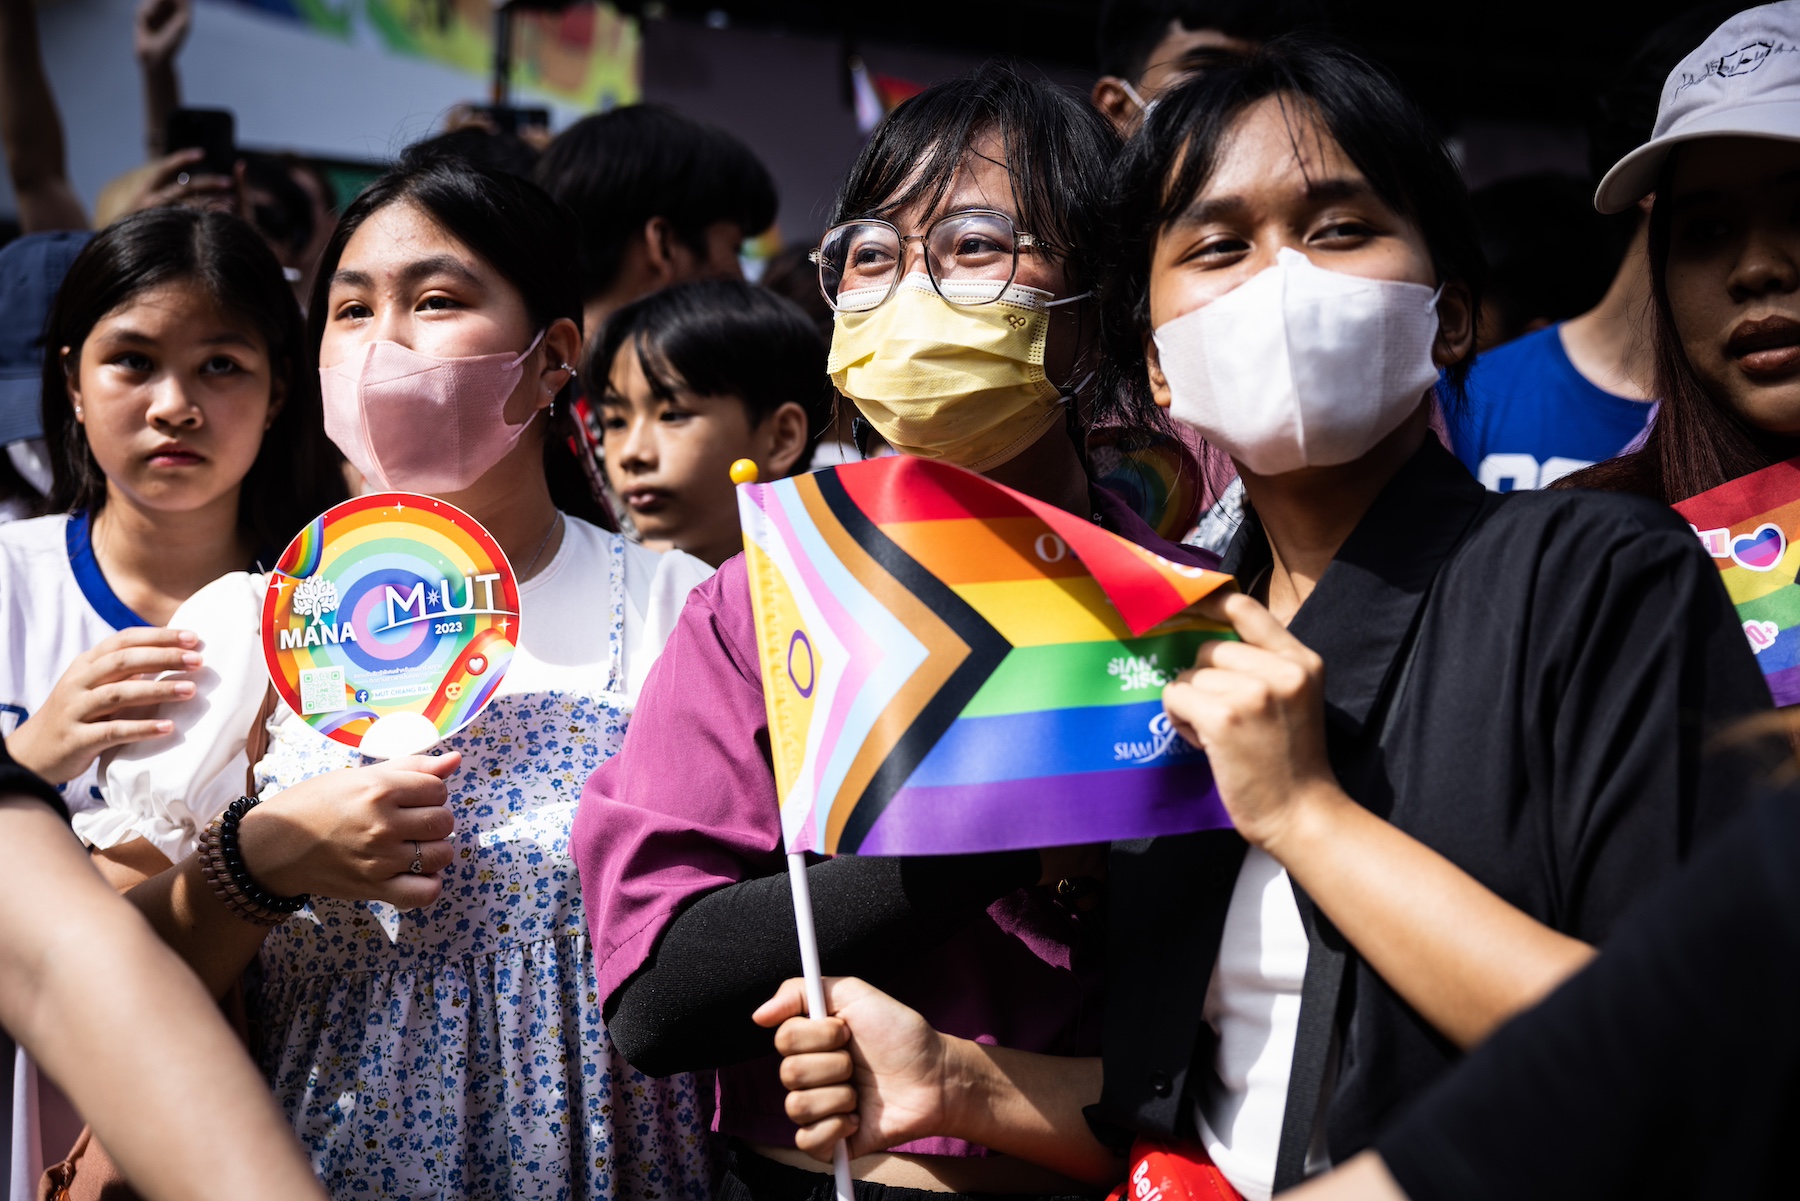 Thailand Has Moved One Step Closer To Legalizing Same-Sex Marriage